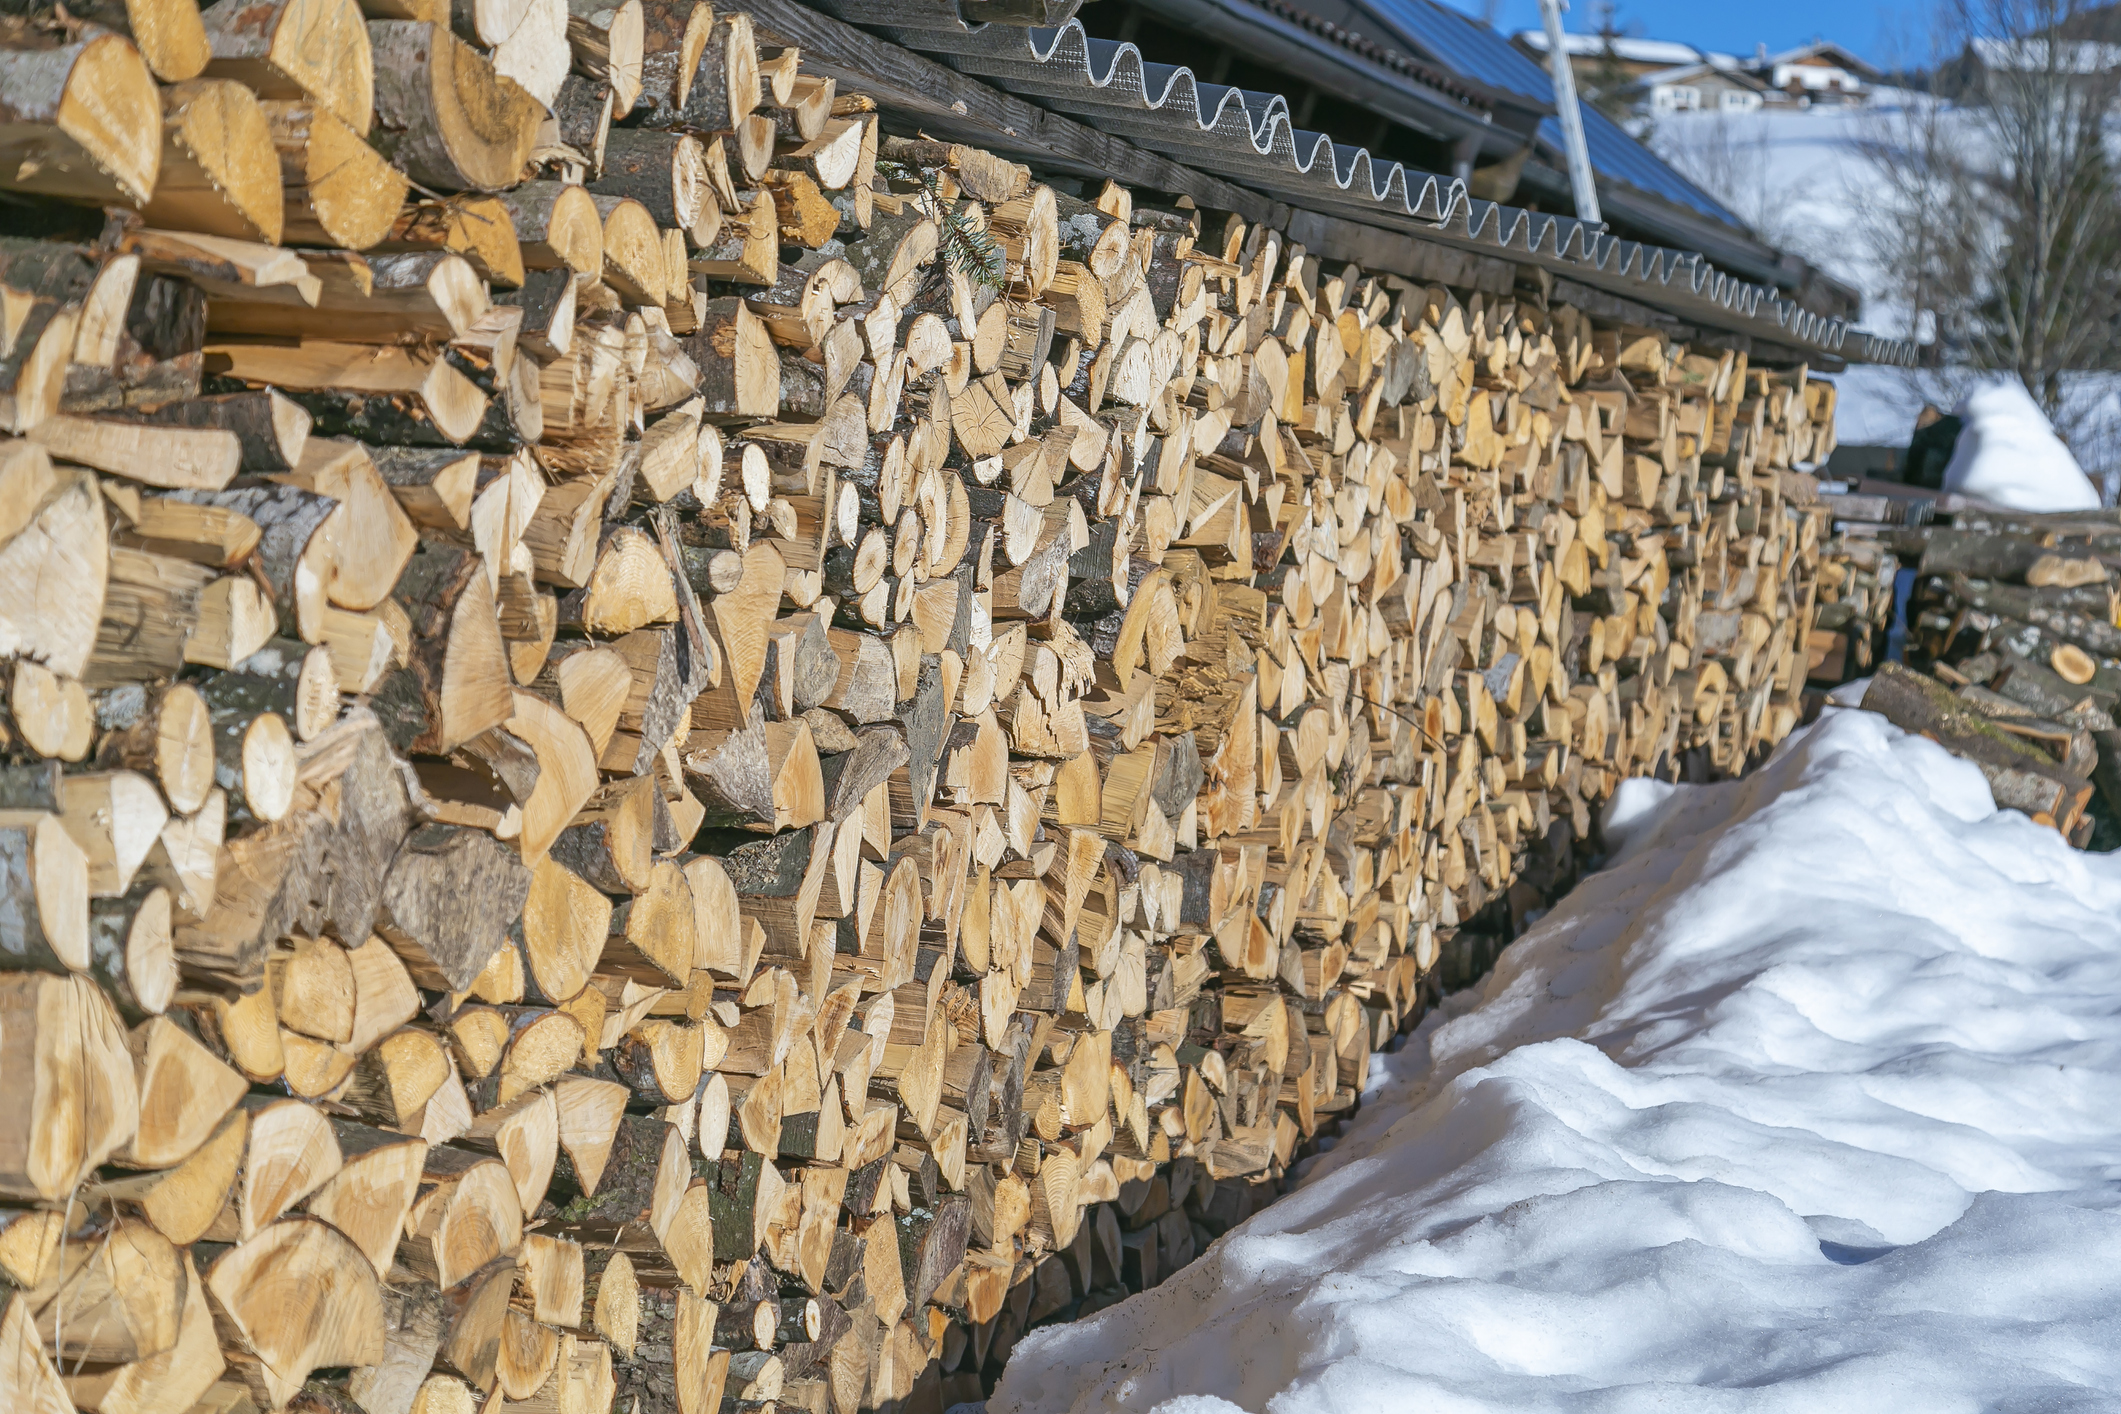 Storing firewood indoors and outdoors – what do you need to know?